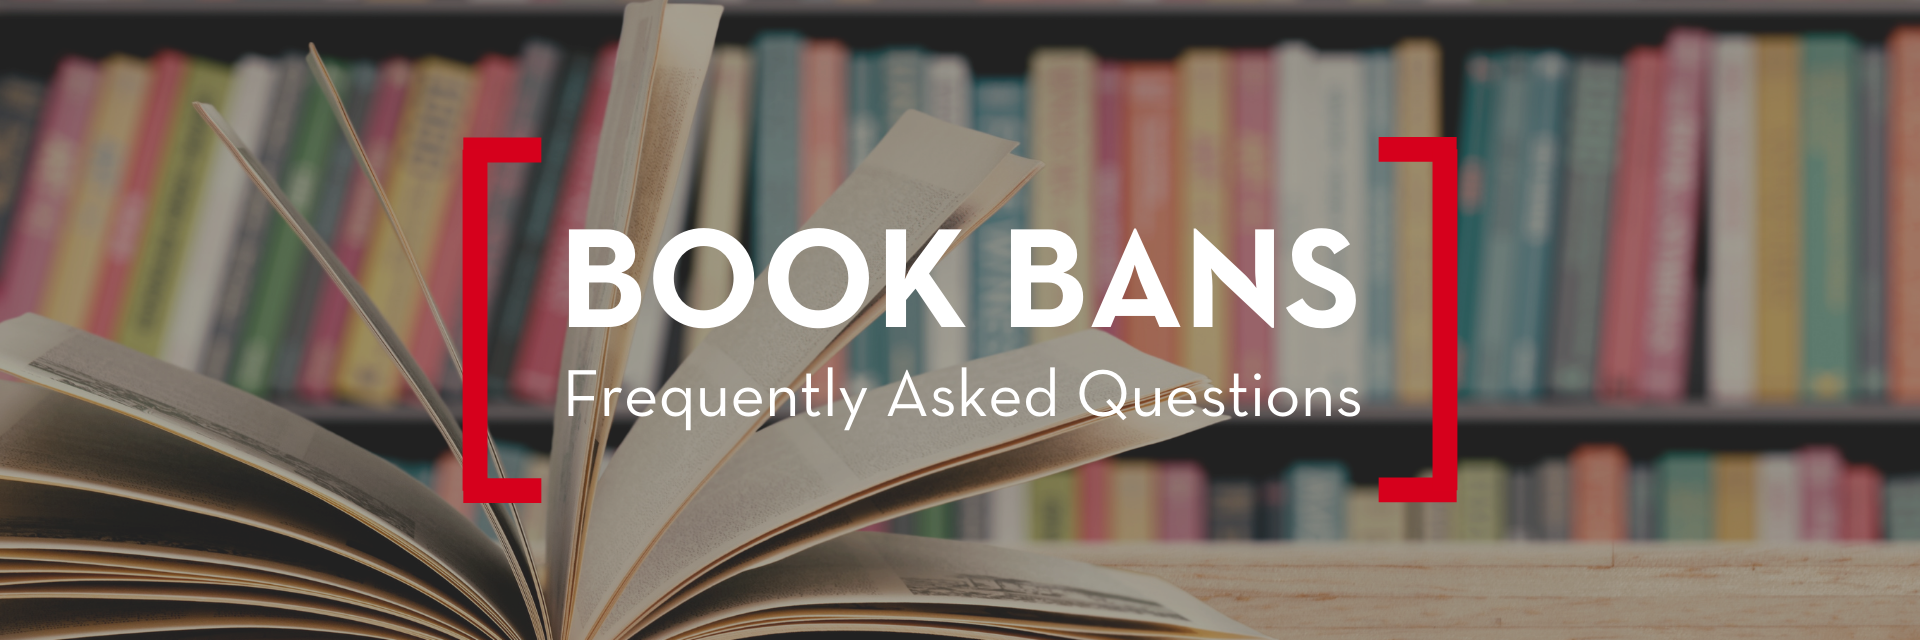 Book Bans: Frequently Asked Questions - PEN America